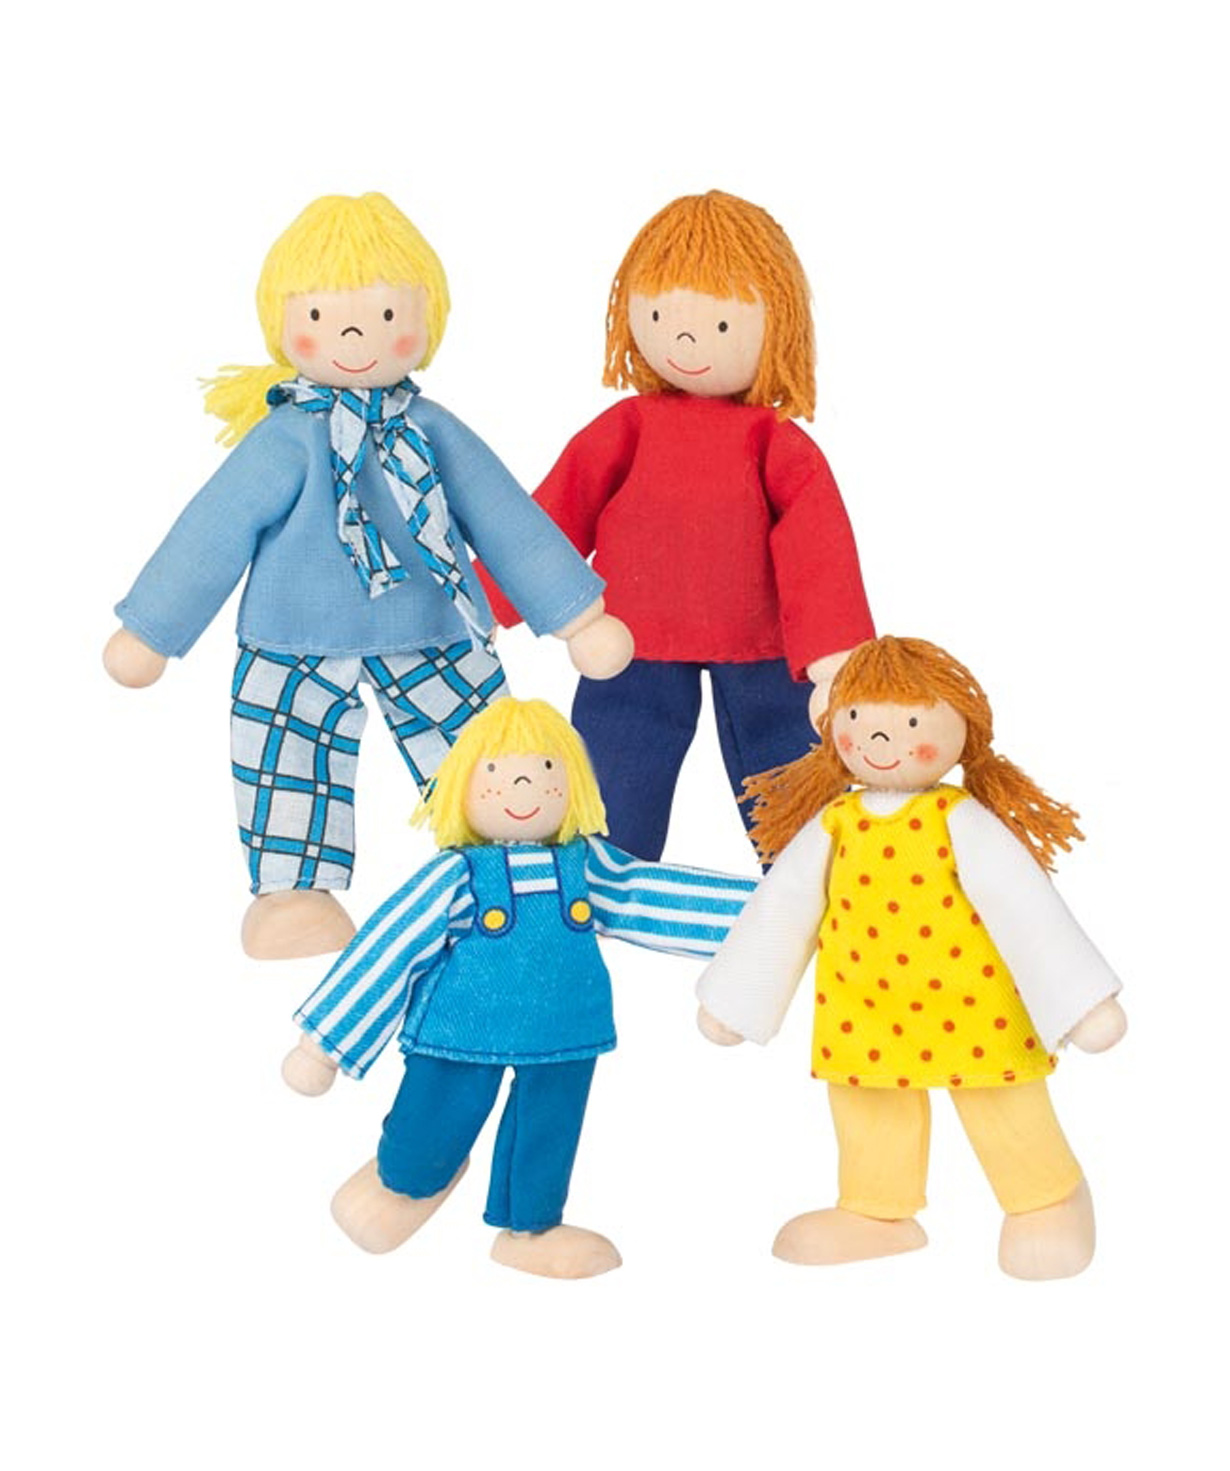 Toy `Goki Toys` flexible puppets Young Family